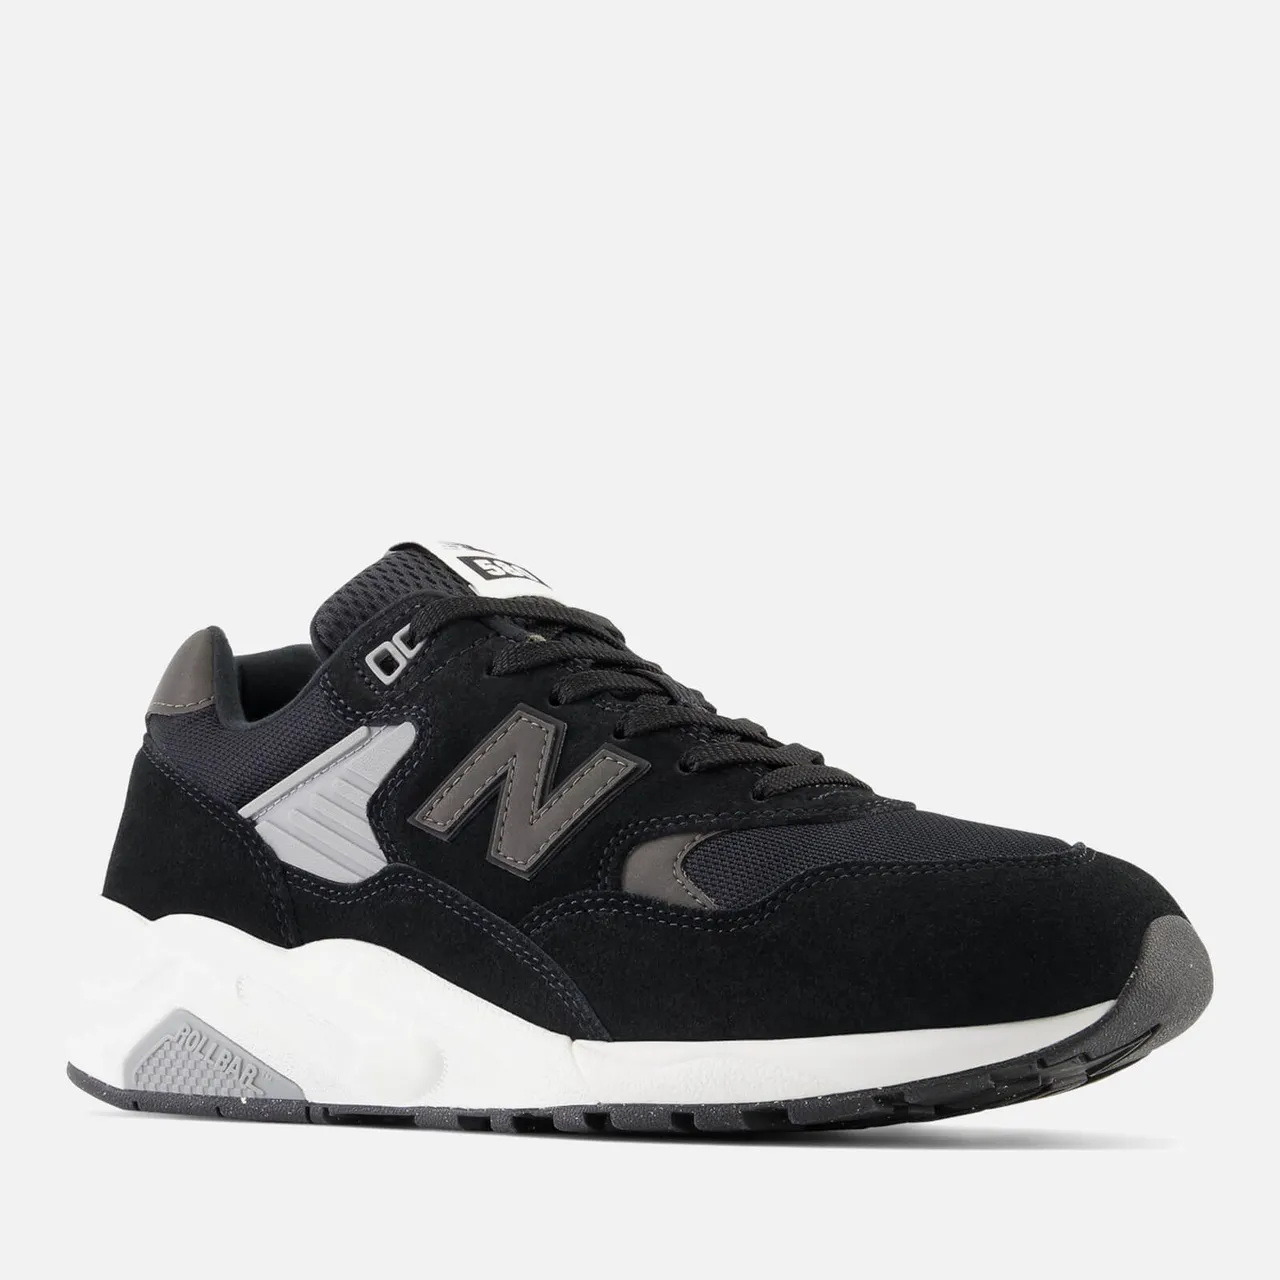 New Balance Men's 580 Suede and Mesh Trainers - UK